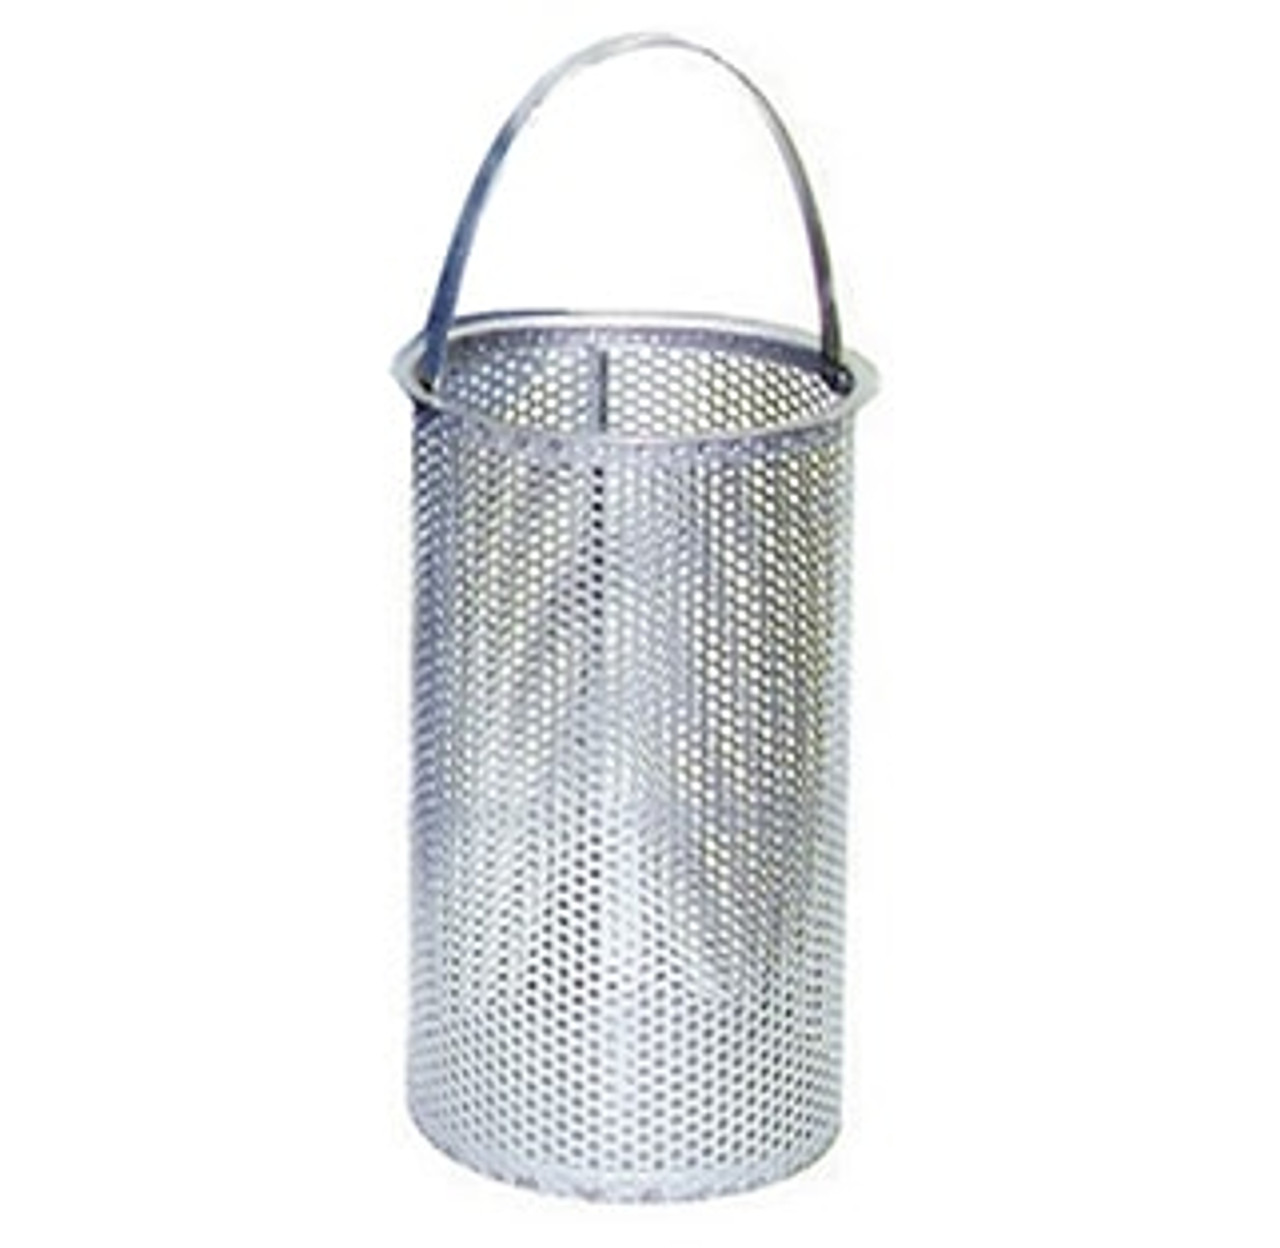 1/8" Perforated Replacement Basket for Eaton Model 72 Strainer Size 2"